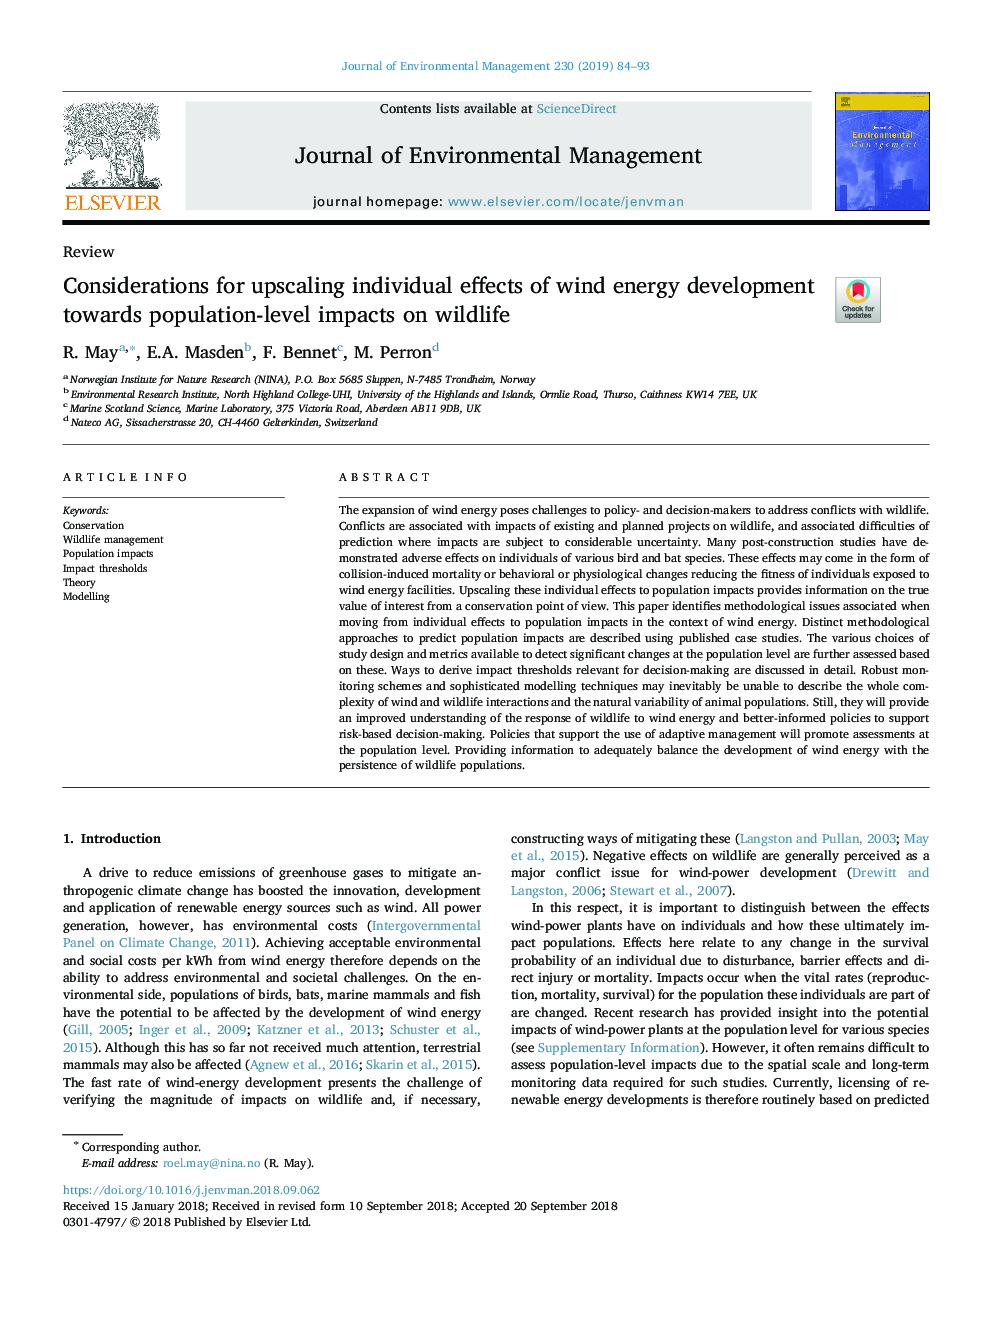 Considerations for upscaling individual effects of wind energy development towards population-level impacts on wildlife